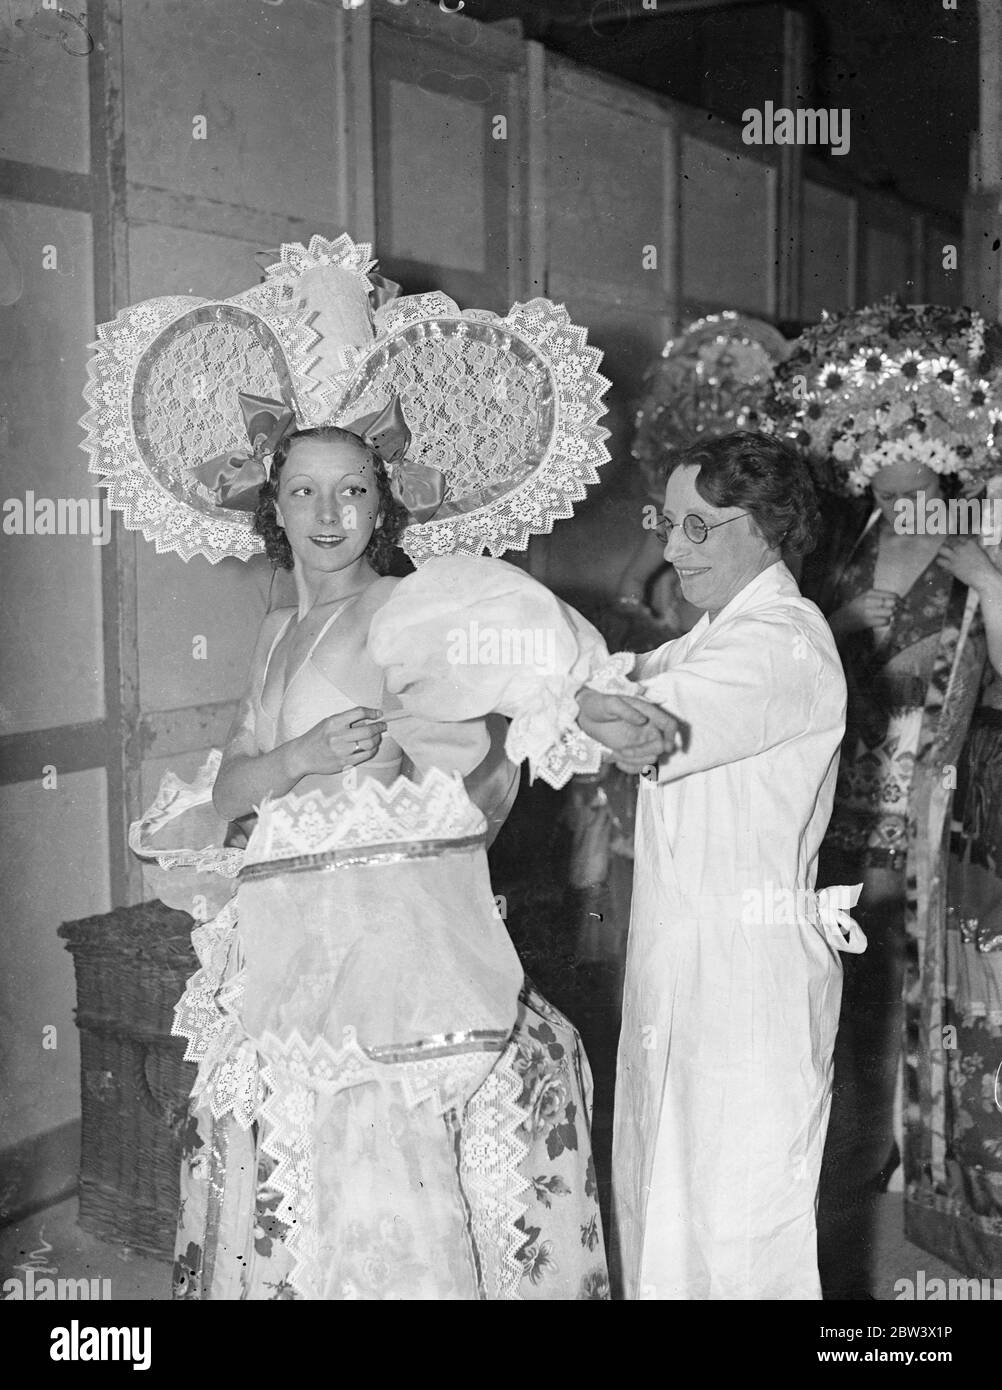 Behind The Scenes At Radio Olympia Theatre . Photo shows : Nan Wealden , one of the Gordon Ray Girls , putting on an elaborate dress before appearing in the variety show at the National Radio Exhibition , Olympia . 26 August 1936 Original caption from negative Stock Photo